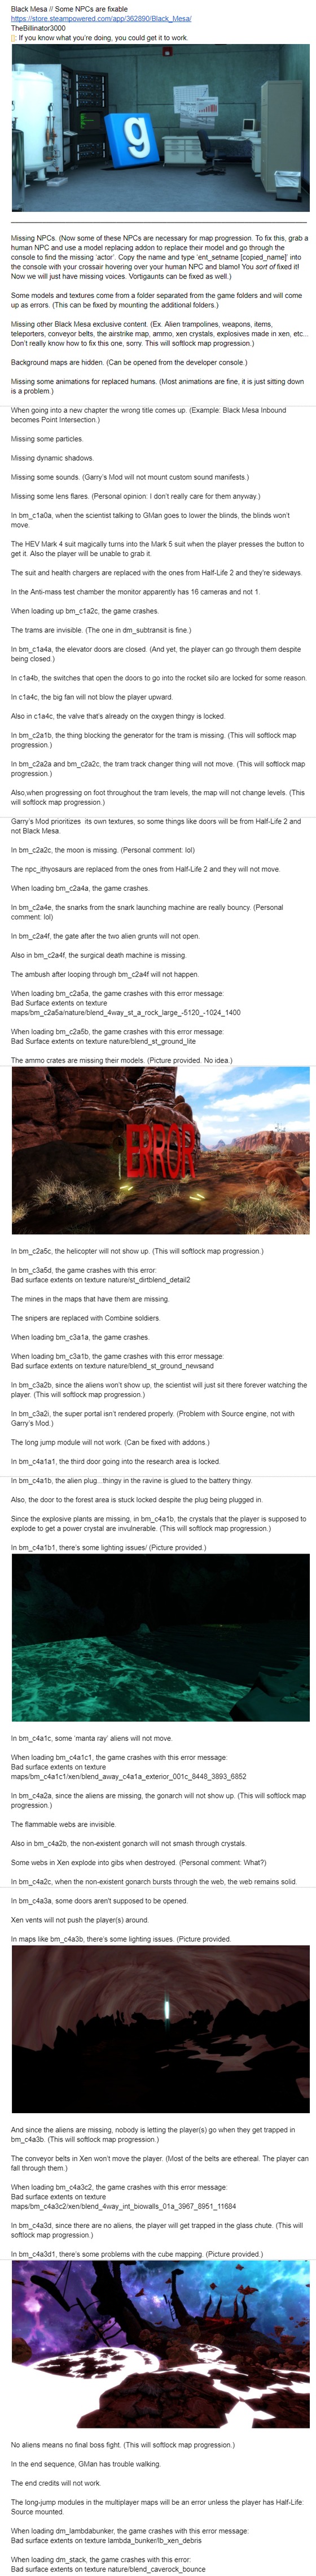 Black Mesa kind of works in Garry's Mod.

Human NPCs can be replaced with default NPCs. 
Everything else may or may not be fixed with addons.

https://store.steampowered.com/app/362890/Black_Mesa/

https://docs.google.com/document/d/1SD2cmJ4AaB6smo13nEqoUnUOV3GapmBiqJKAgWGBSmA/edit?usp=sharing